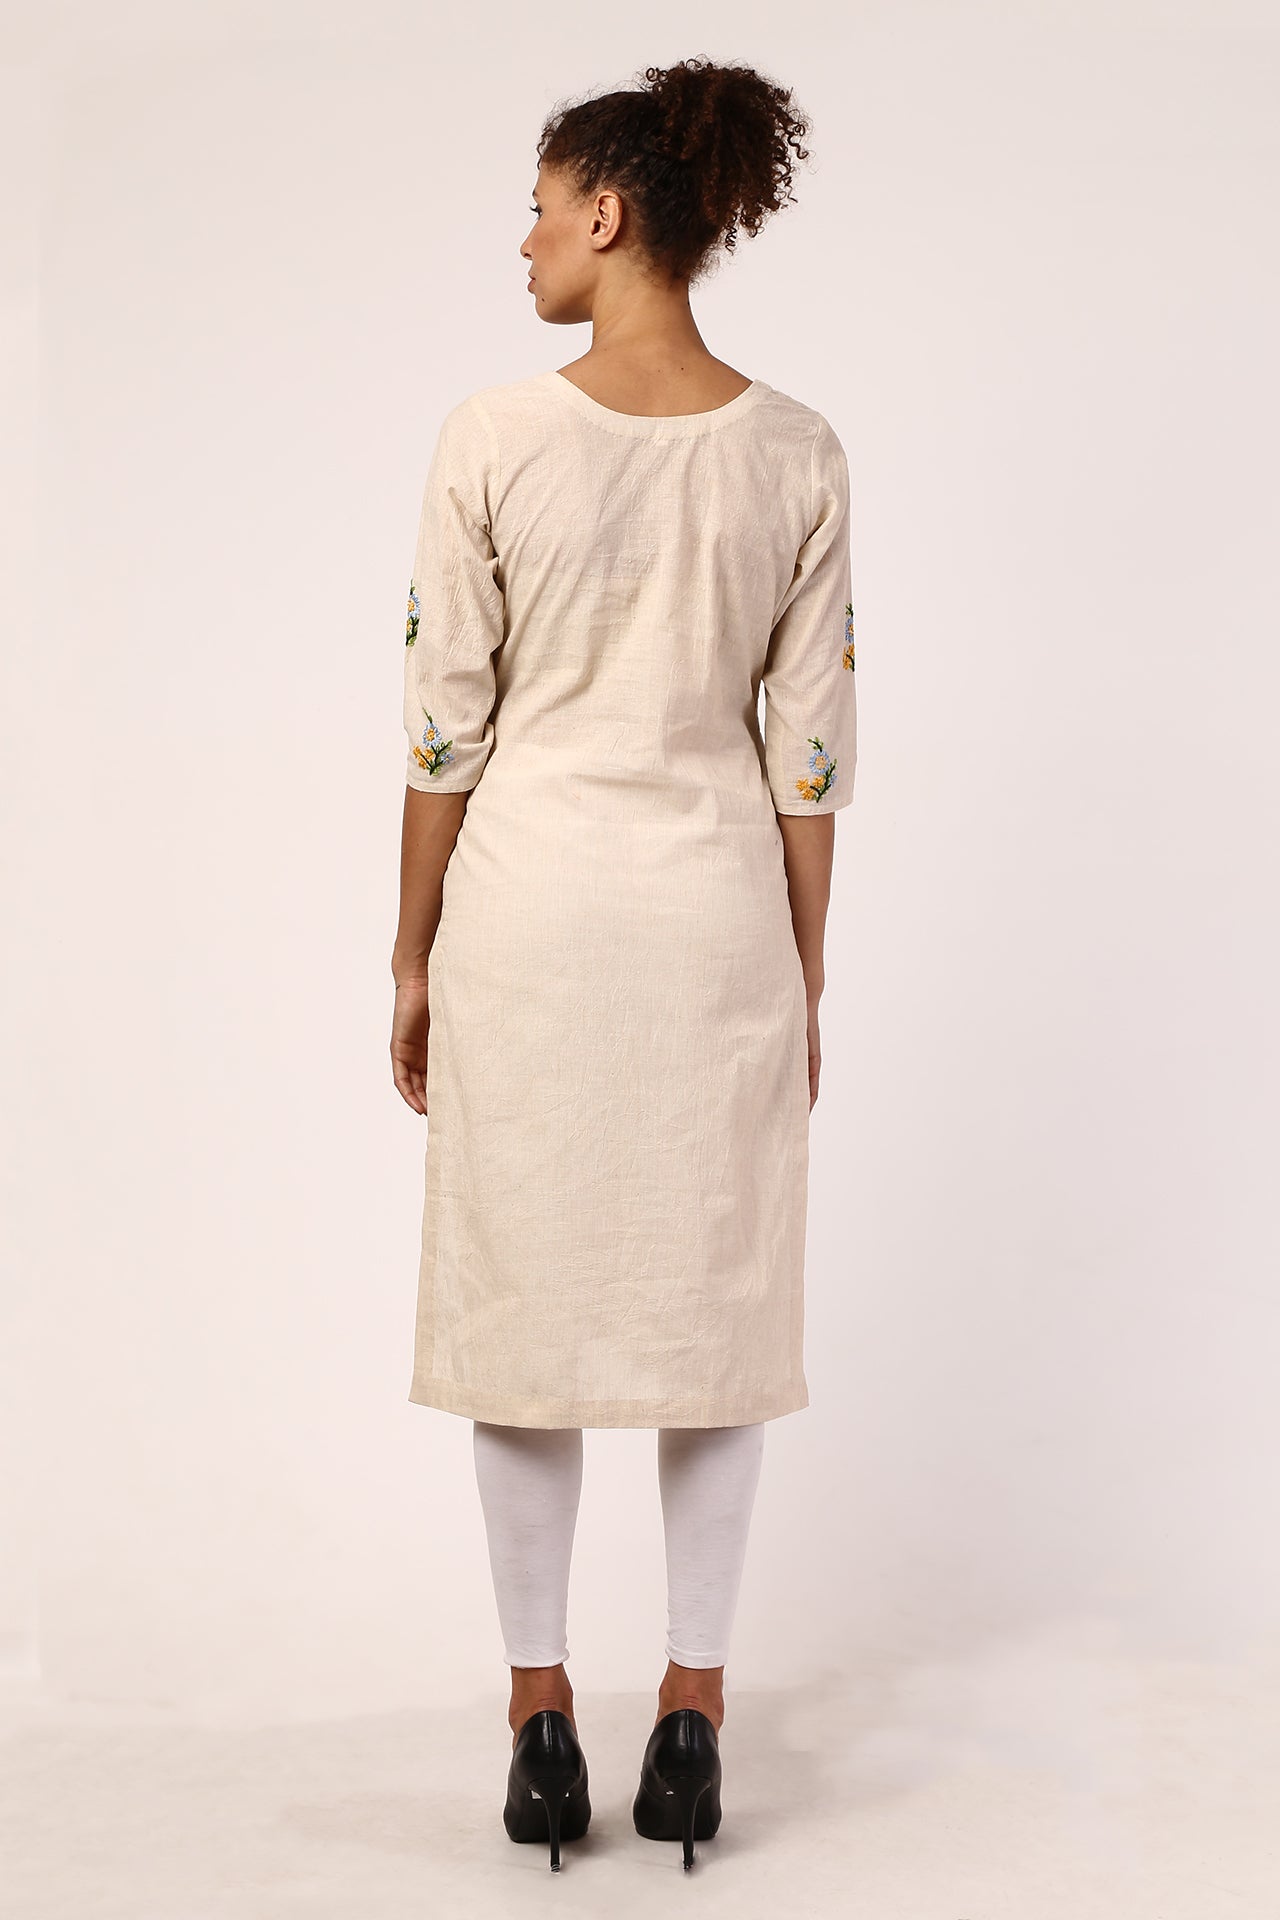 AMODINI OFF -WHITE COTTON WITH BLUE EMBROIDERY ROUND NECK STRAIGHT FIT KURTA